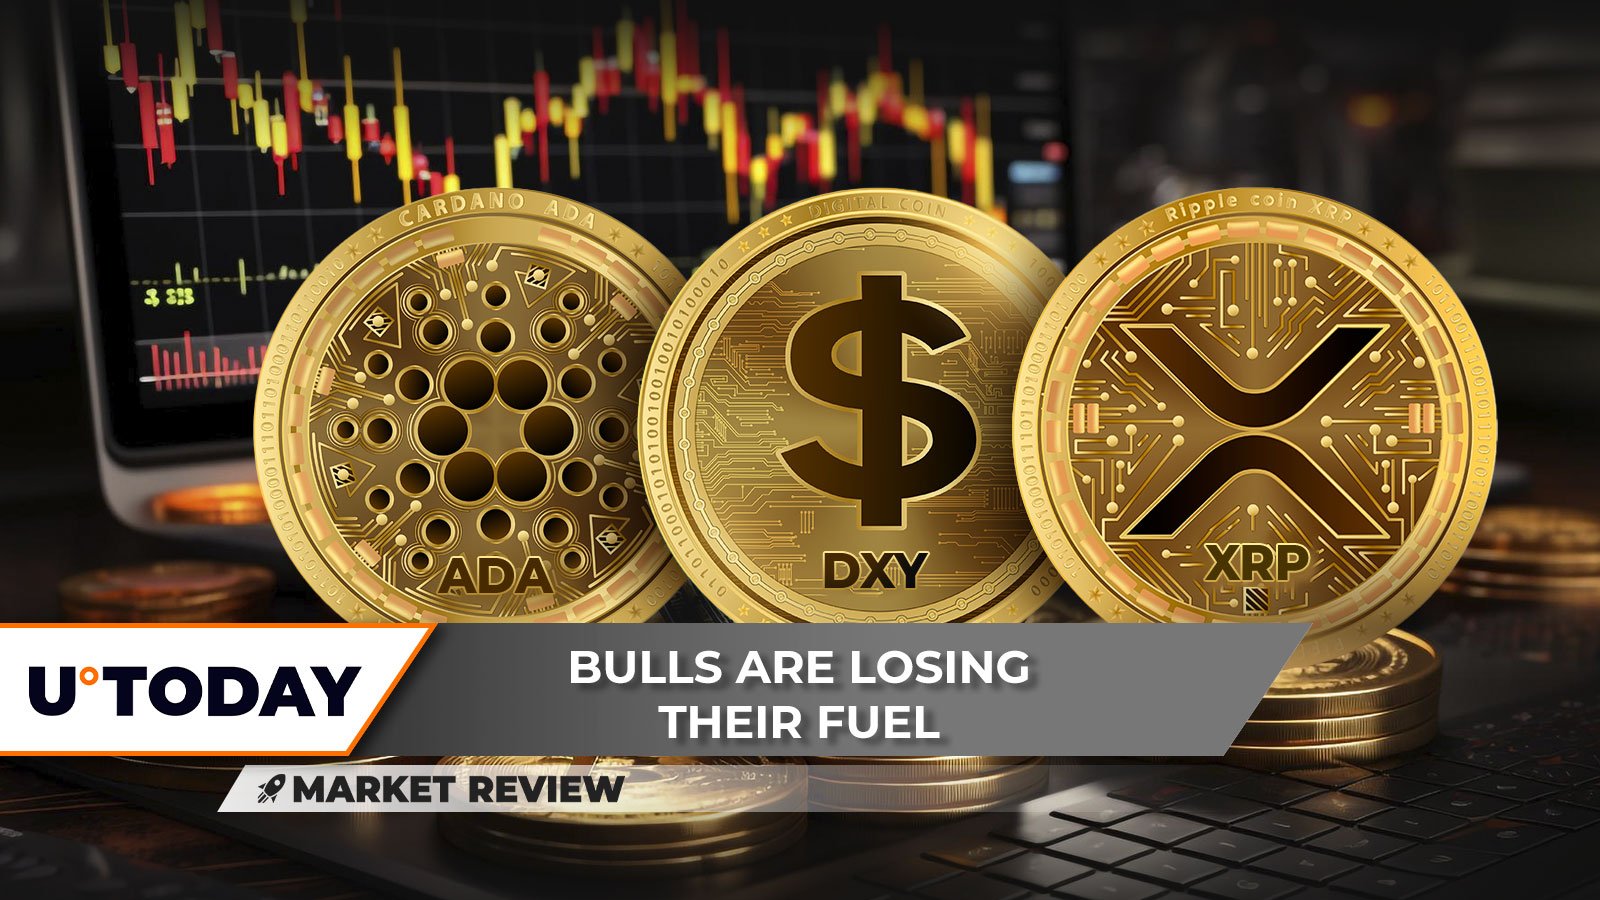 Will XRP Return at $0.5? DXY Golden Cross Can Send Crypto Down, Cardano Turns off Bullish Mode